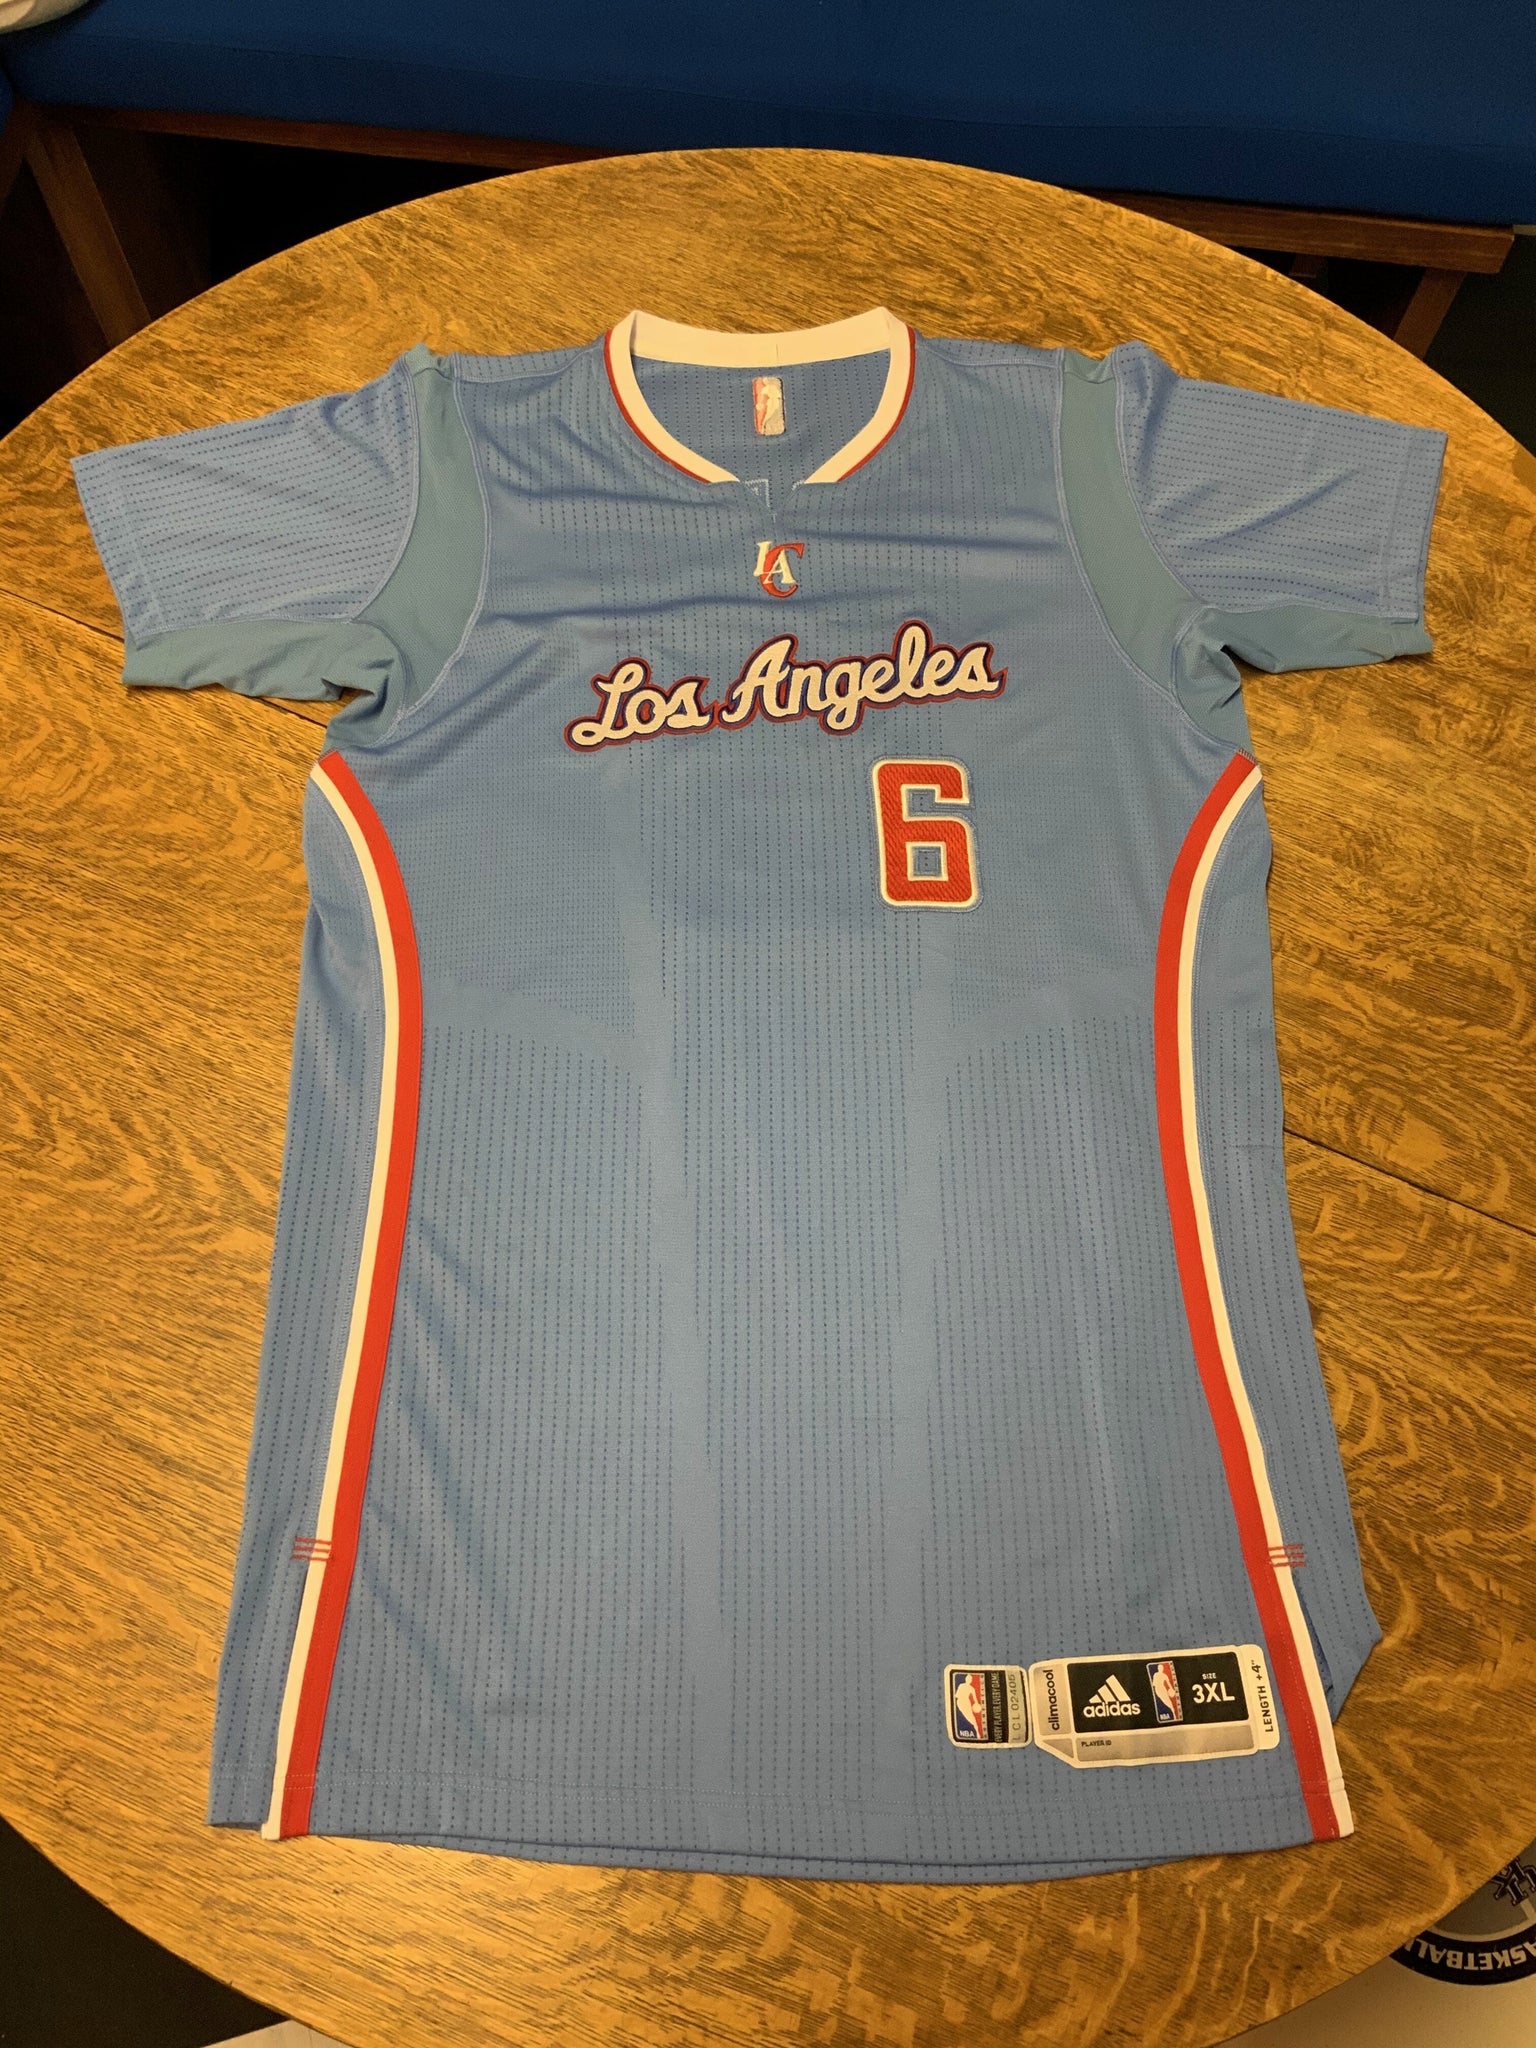 DeAndre Jordan Philadelphia 76ers Game-Used #9 White Jersey Worn During the  First Half of the Game vs. Los Angeles Lakers on March 23 2022